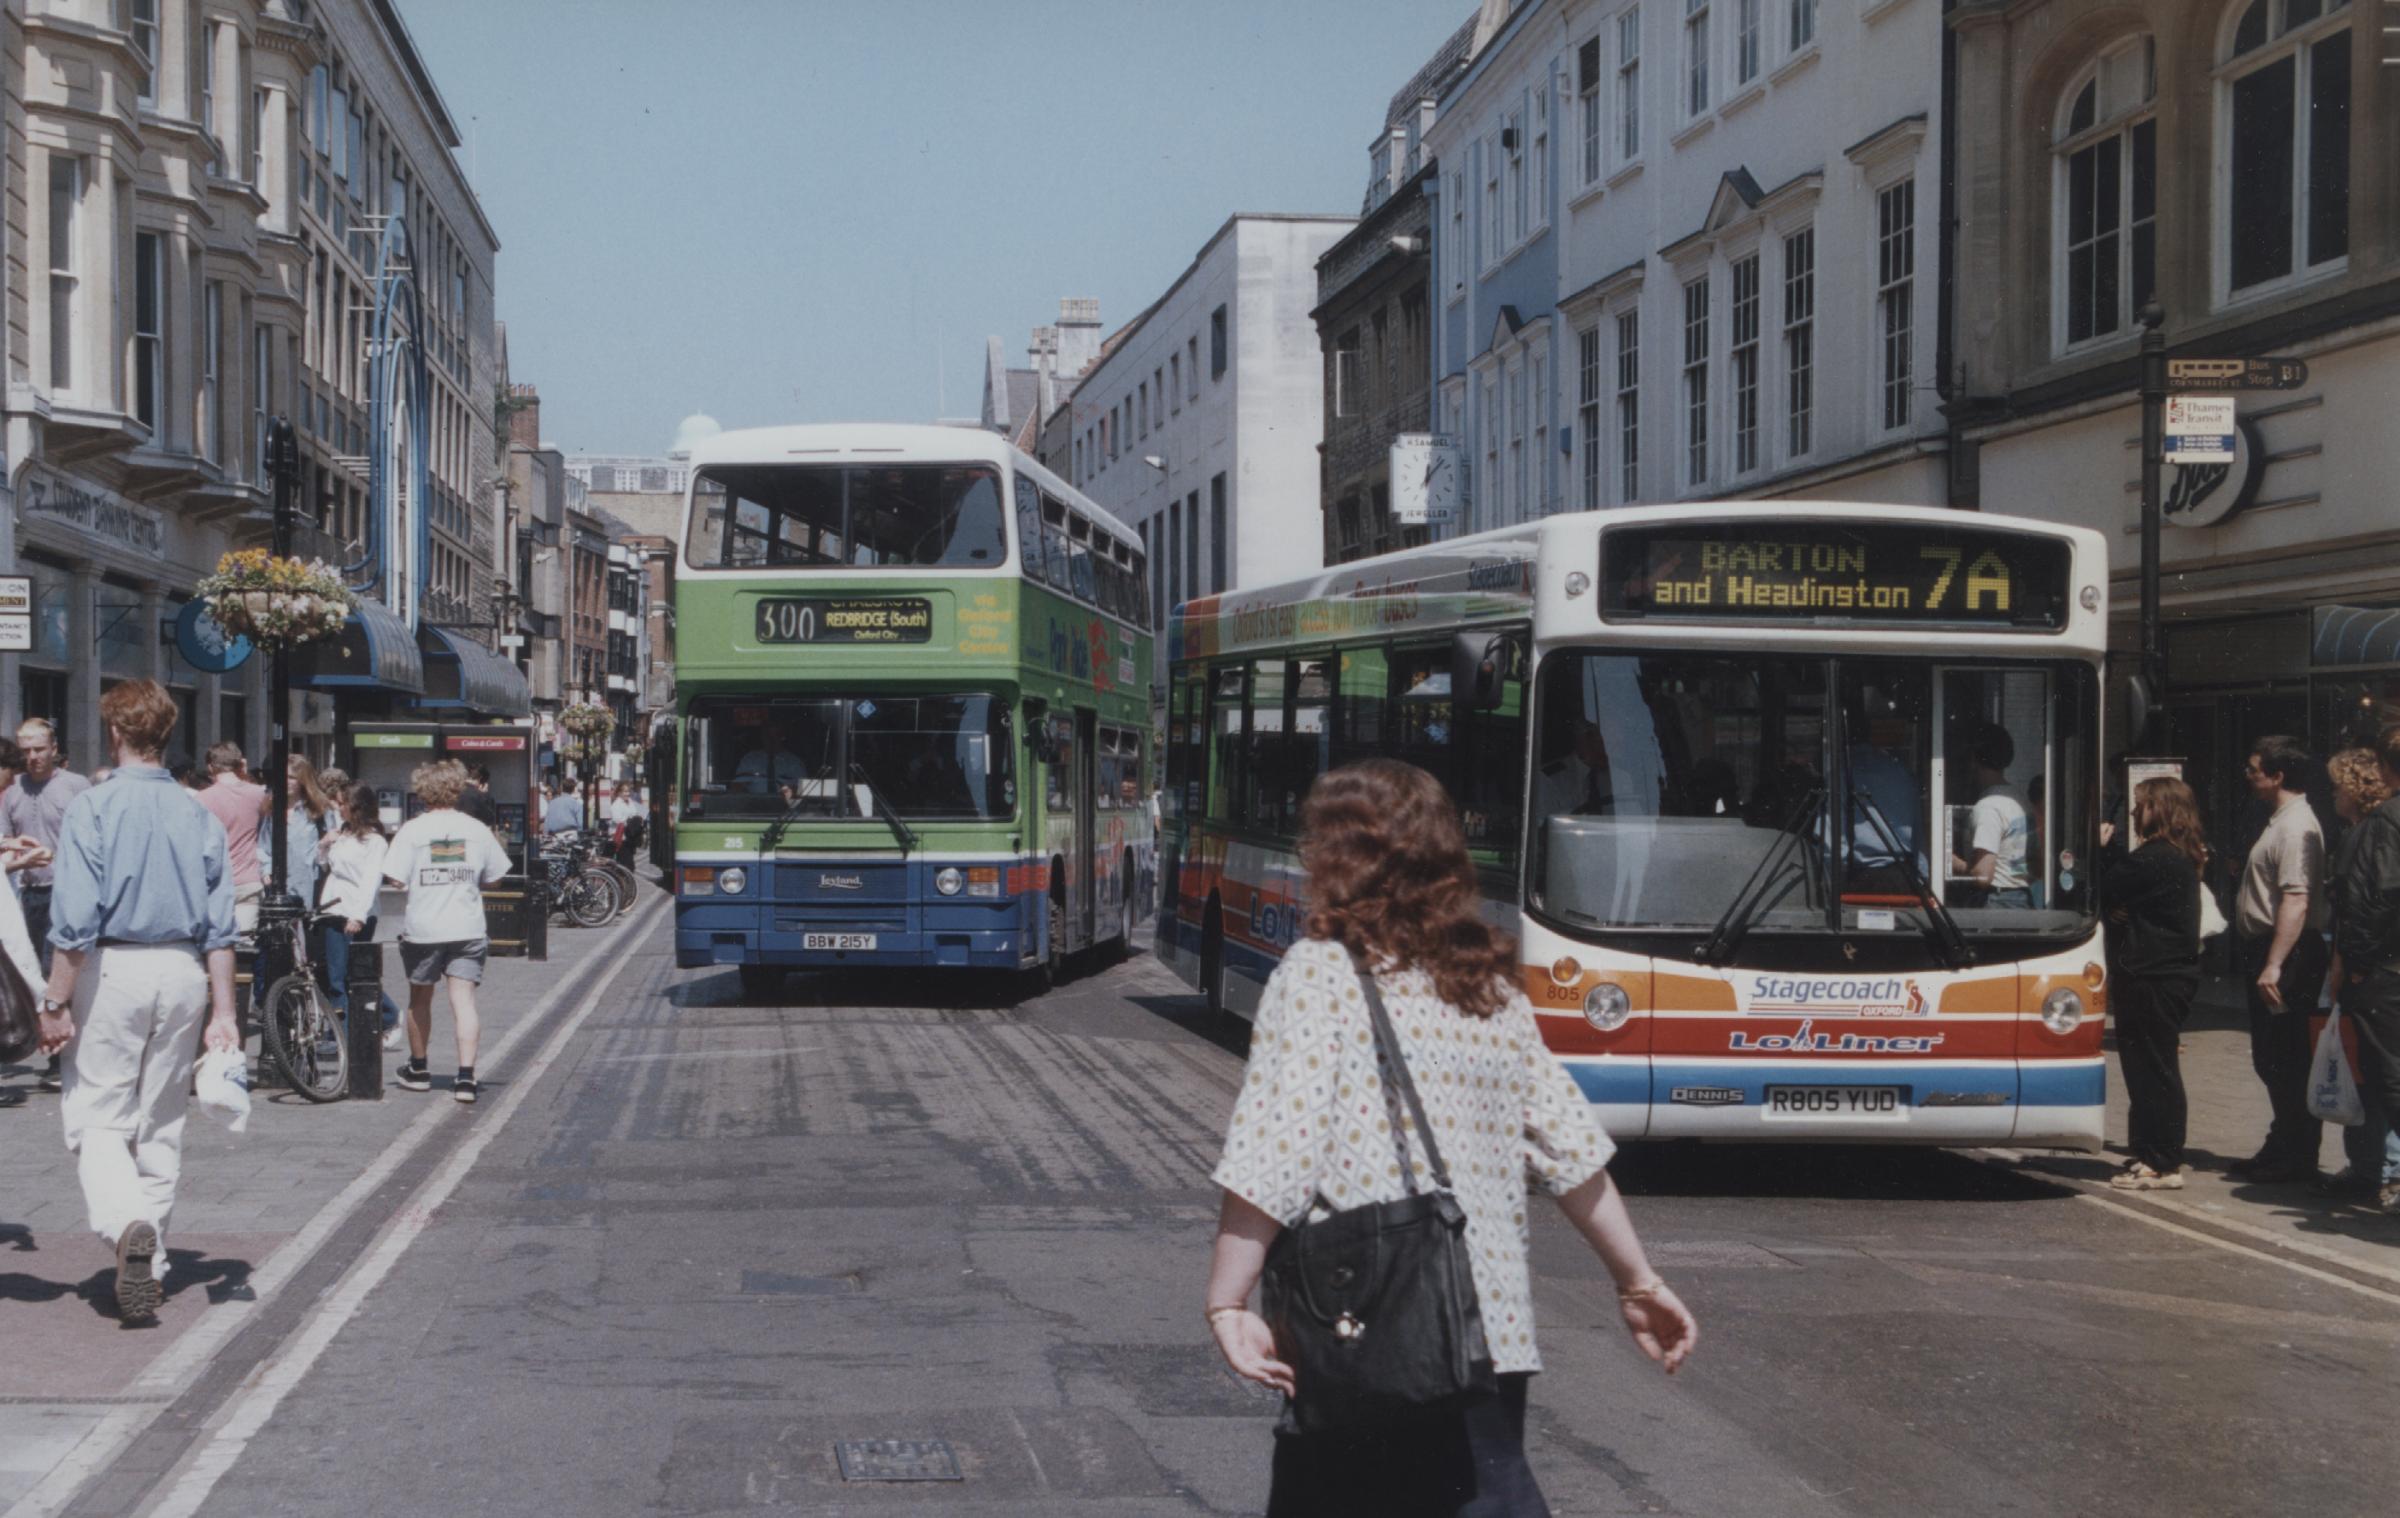 Buses could return to Cornmarket Street in Oxford for the first time in 17 years